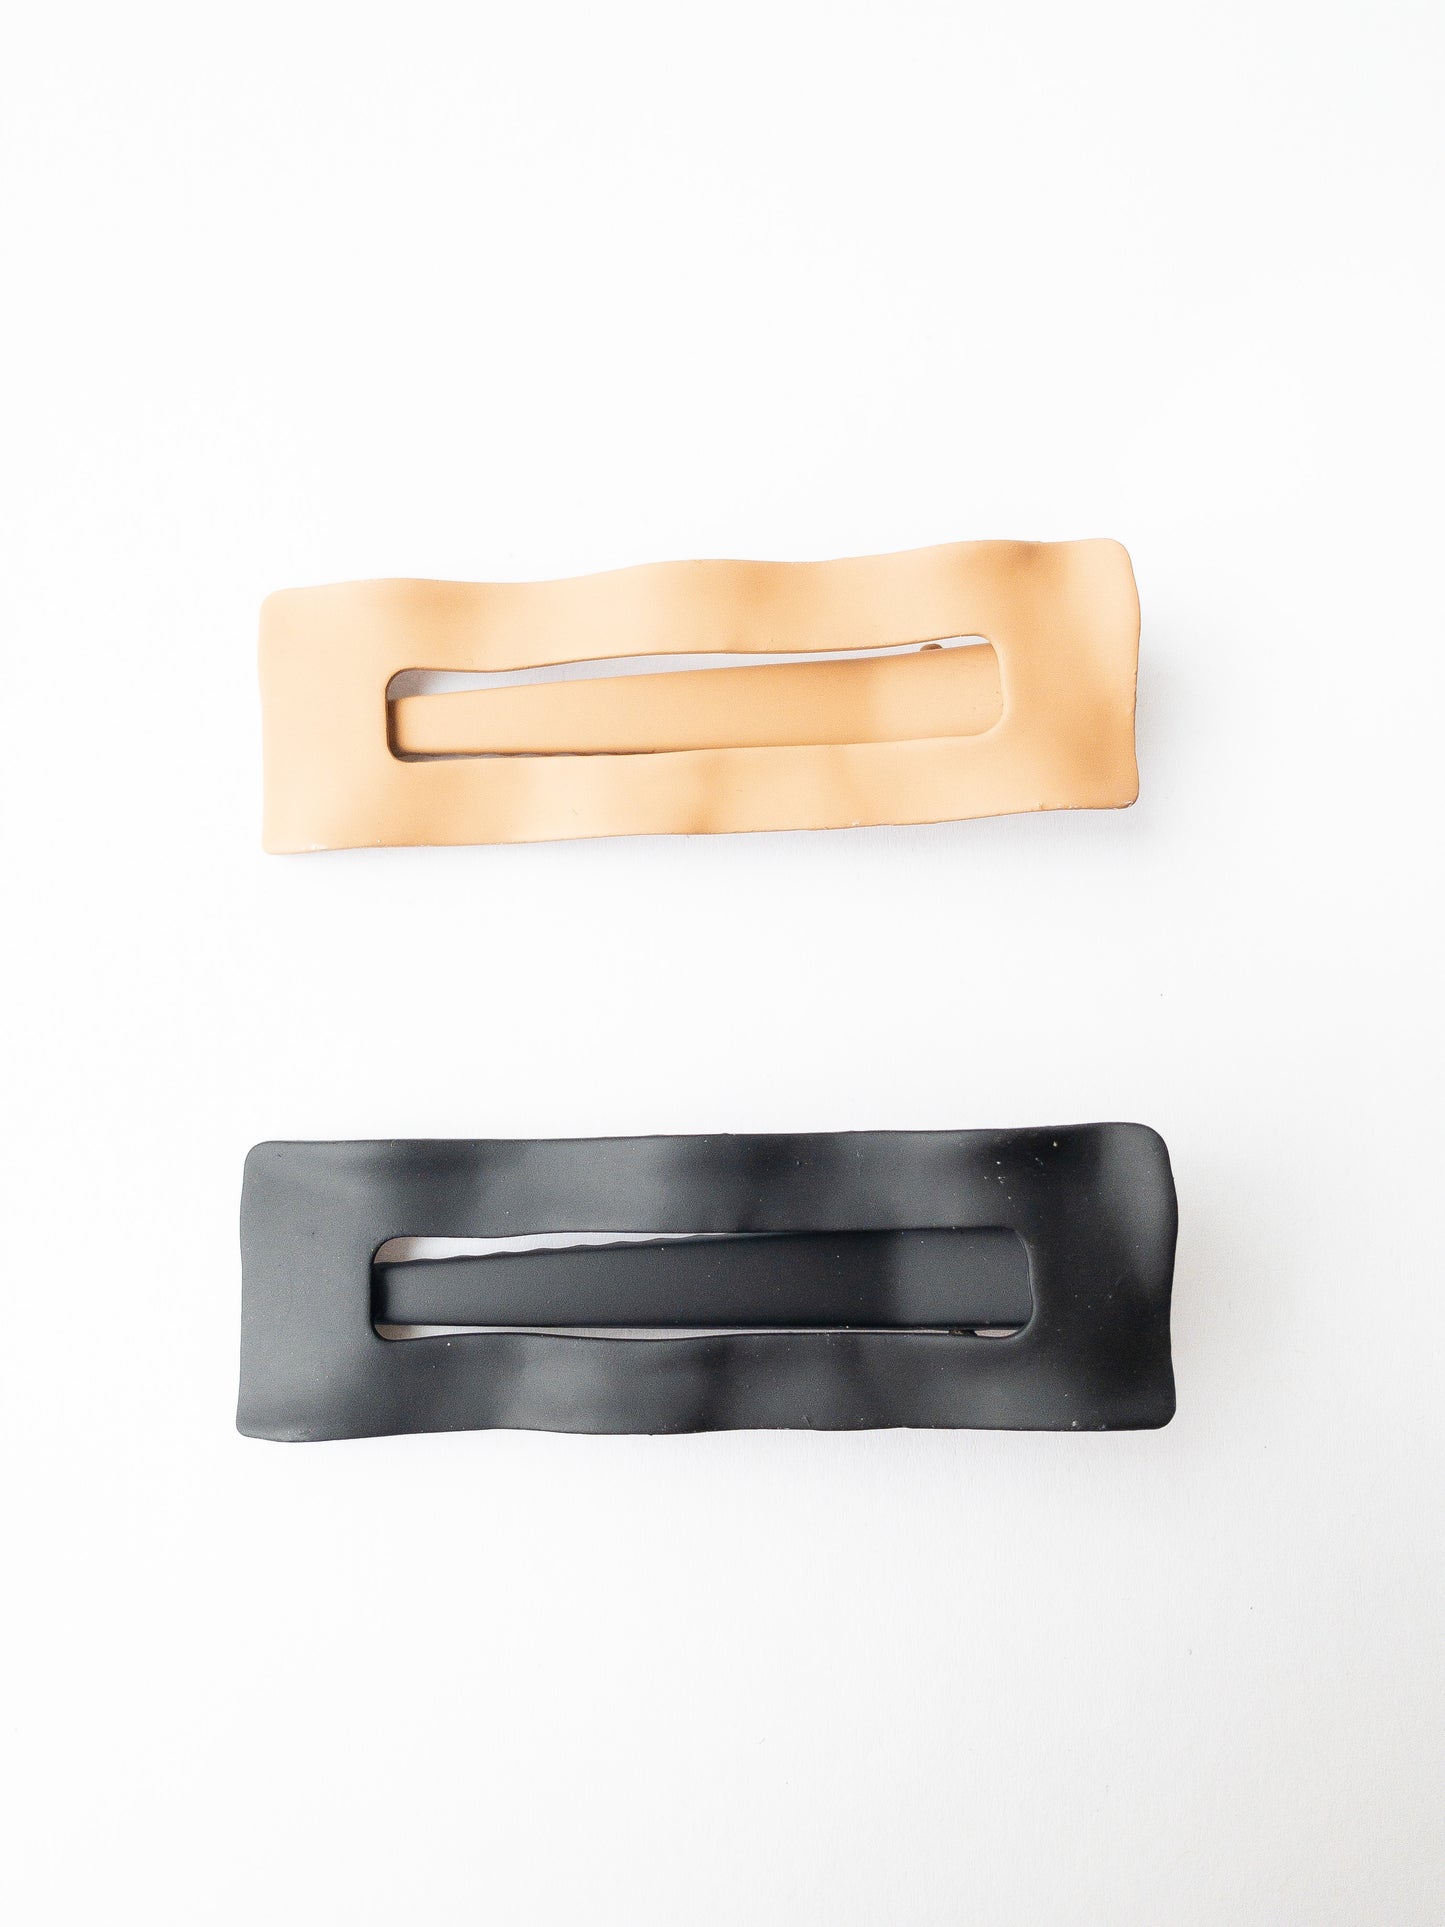 Wavy and chic, these barrettes come in two very modern matte colors: latte and black. These grip so well! And are sturdy yet lightweight to hold your hair beautifully. 